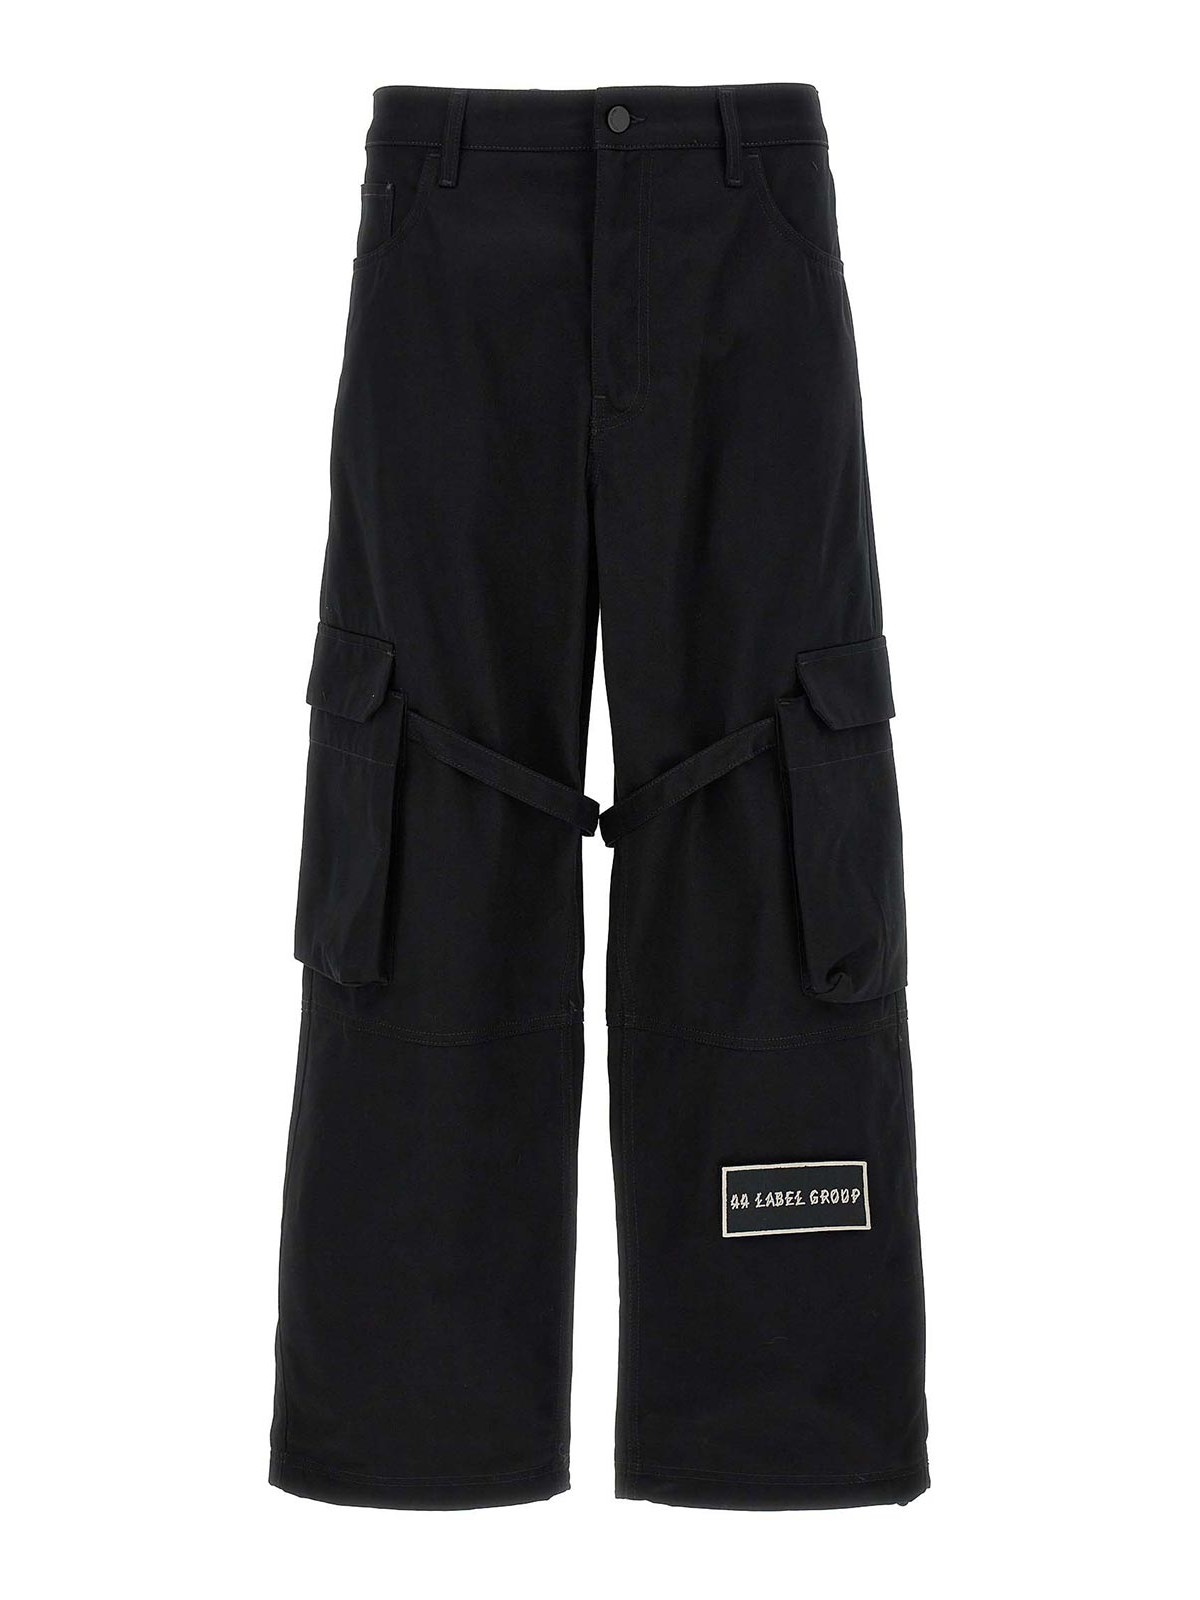 44 Label Group Cargo Trousers Logo In Black